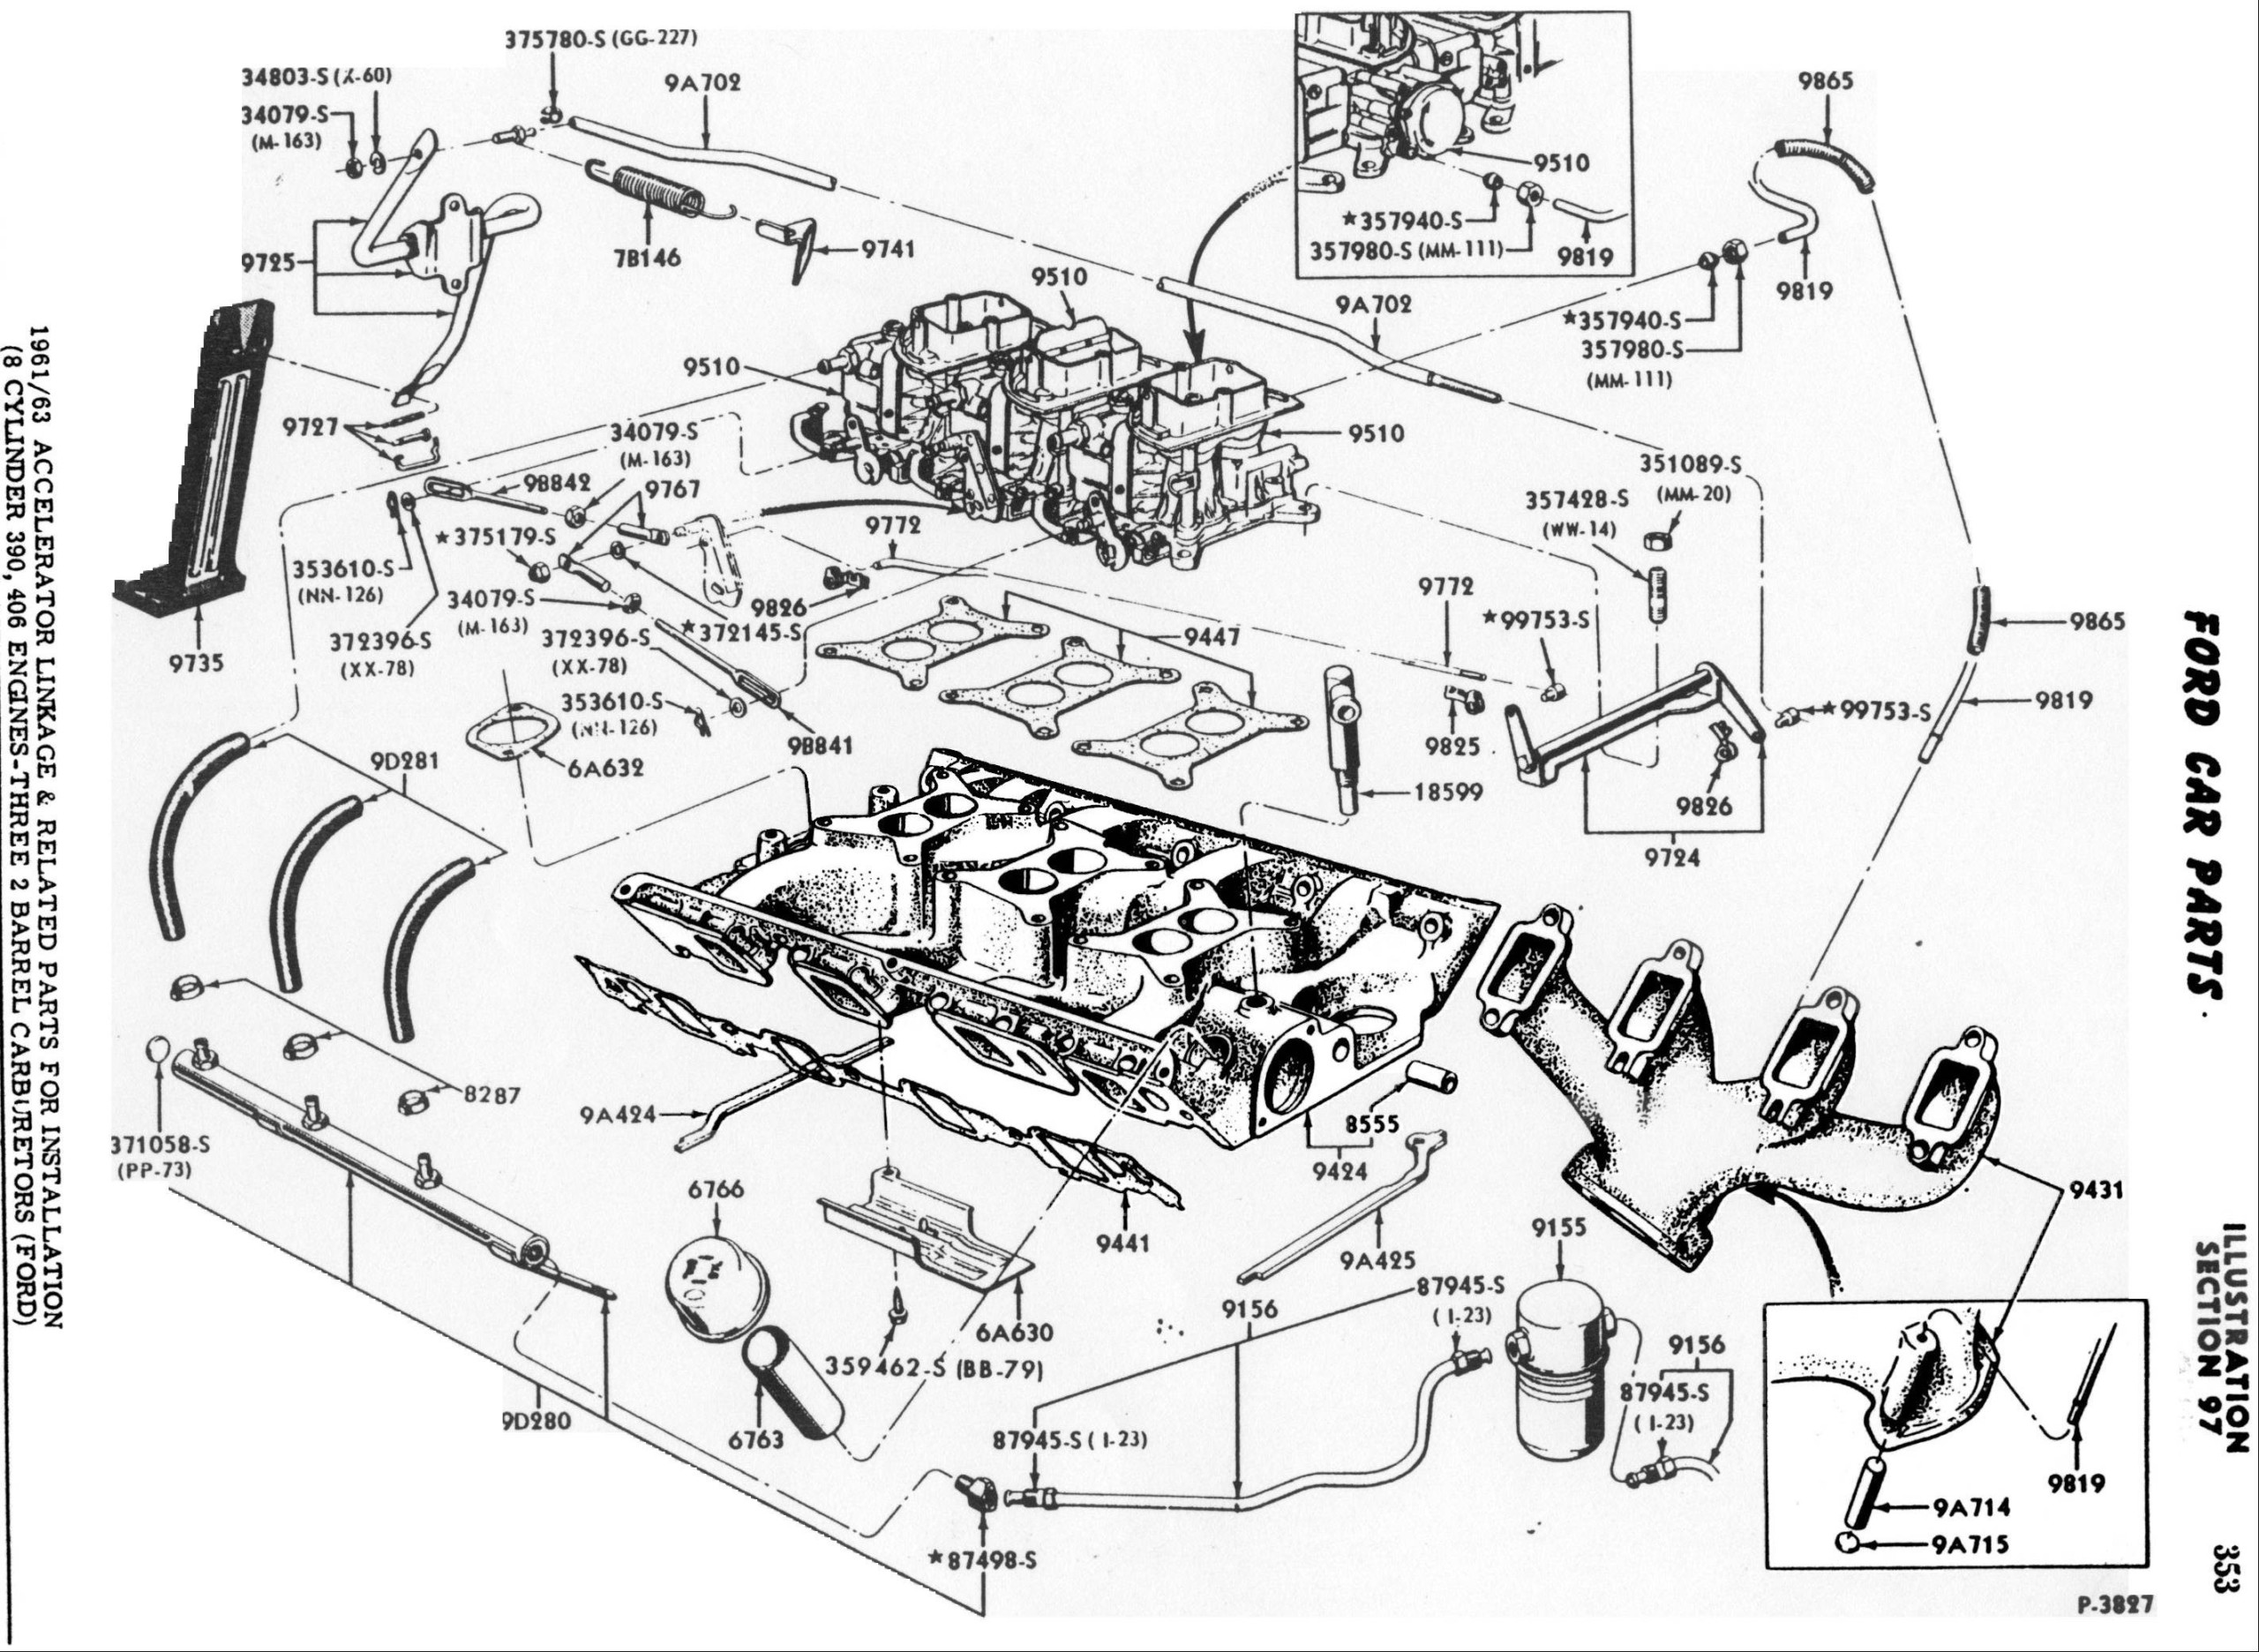 ? [Diagram In Pictures Database] 350 Chevy Engine Wiring